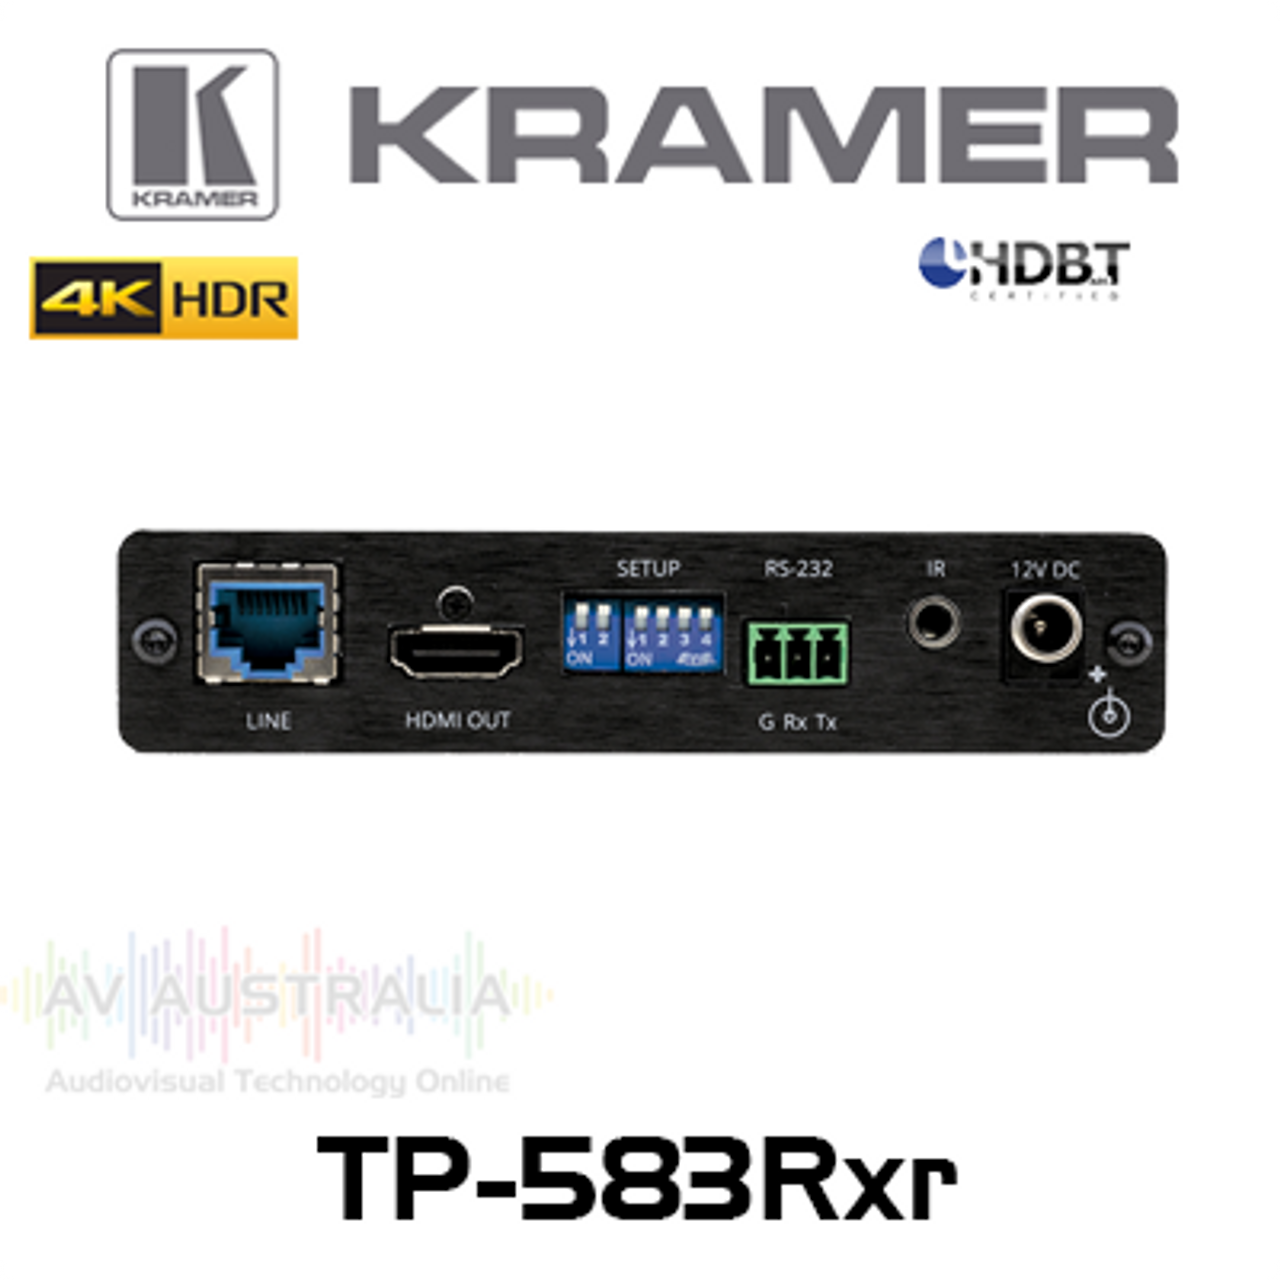 Kramer TP-583RXR 4K60 HDR HDMI Over HDBaseT Receiver With RS-232 & IR (100m)